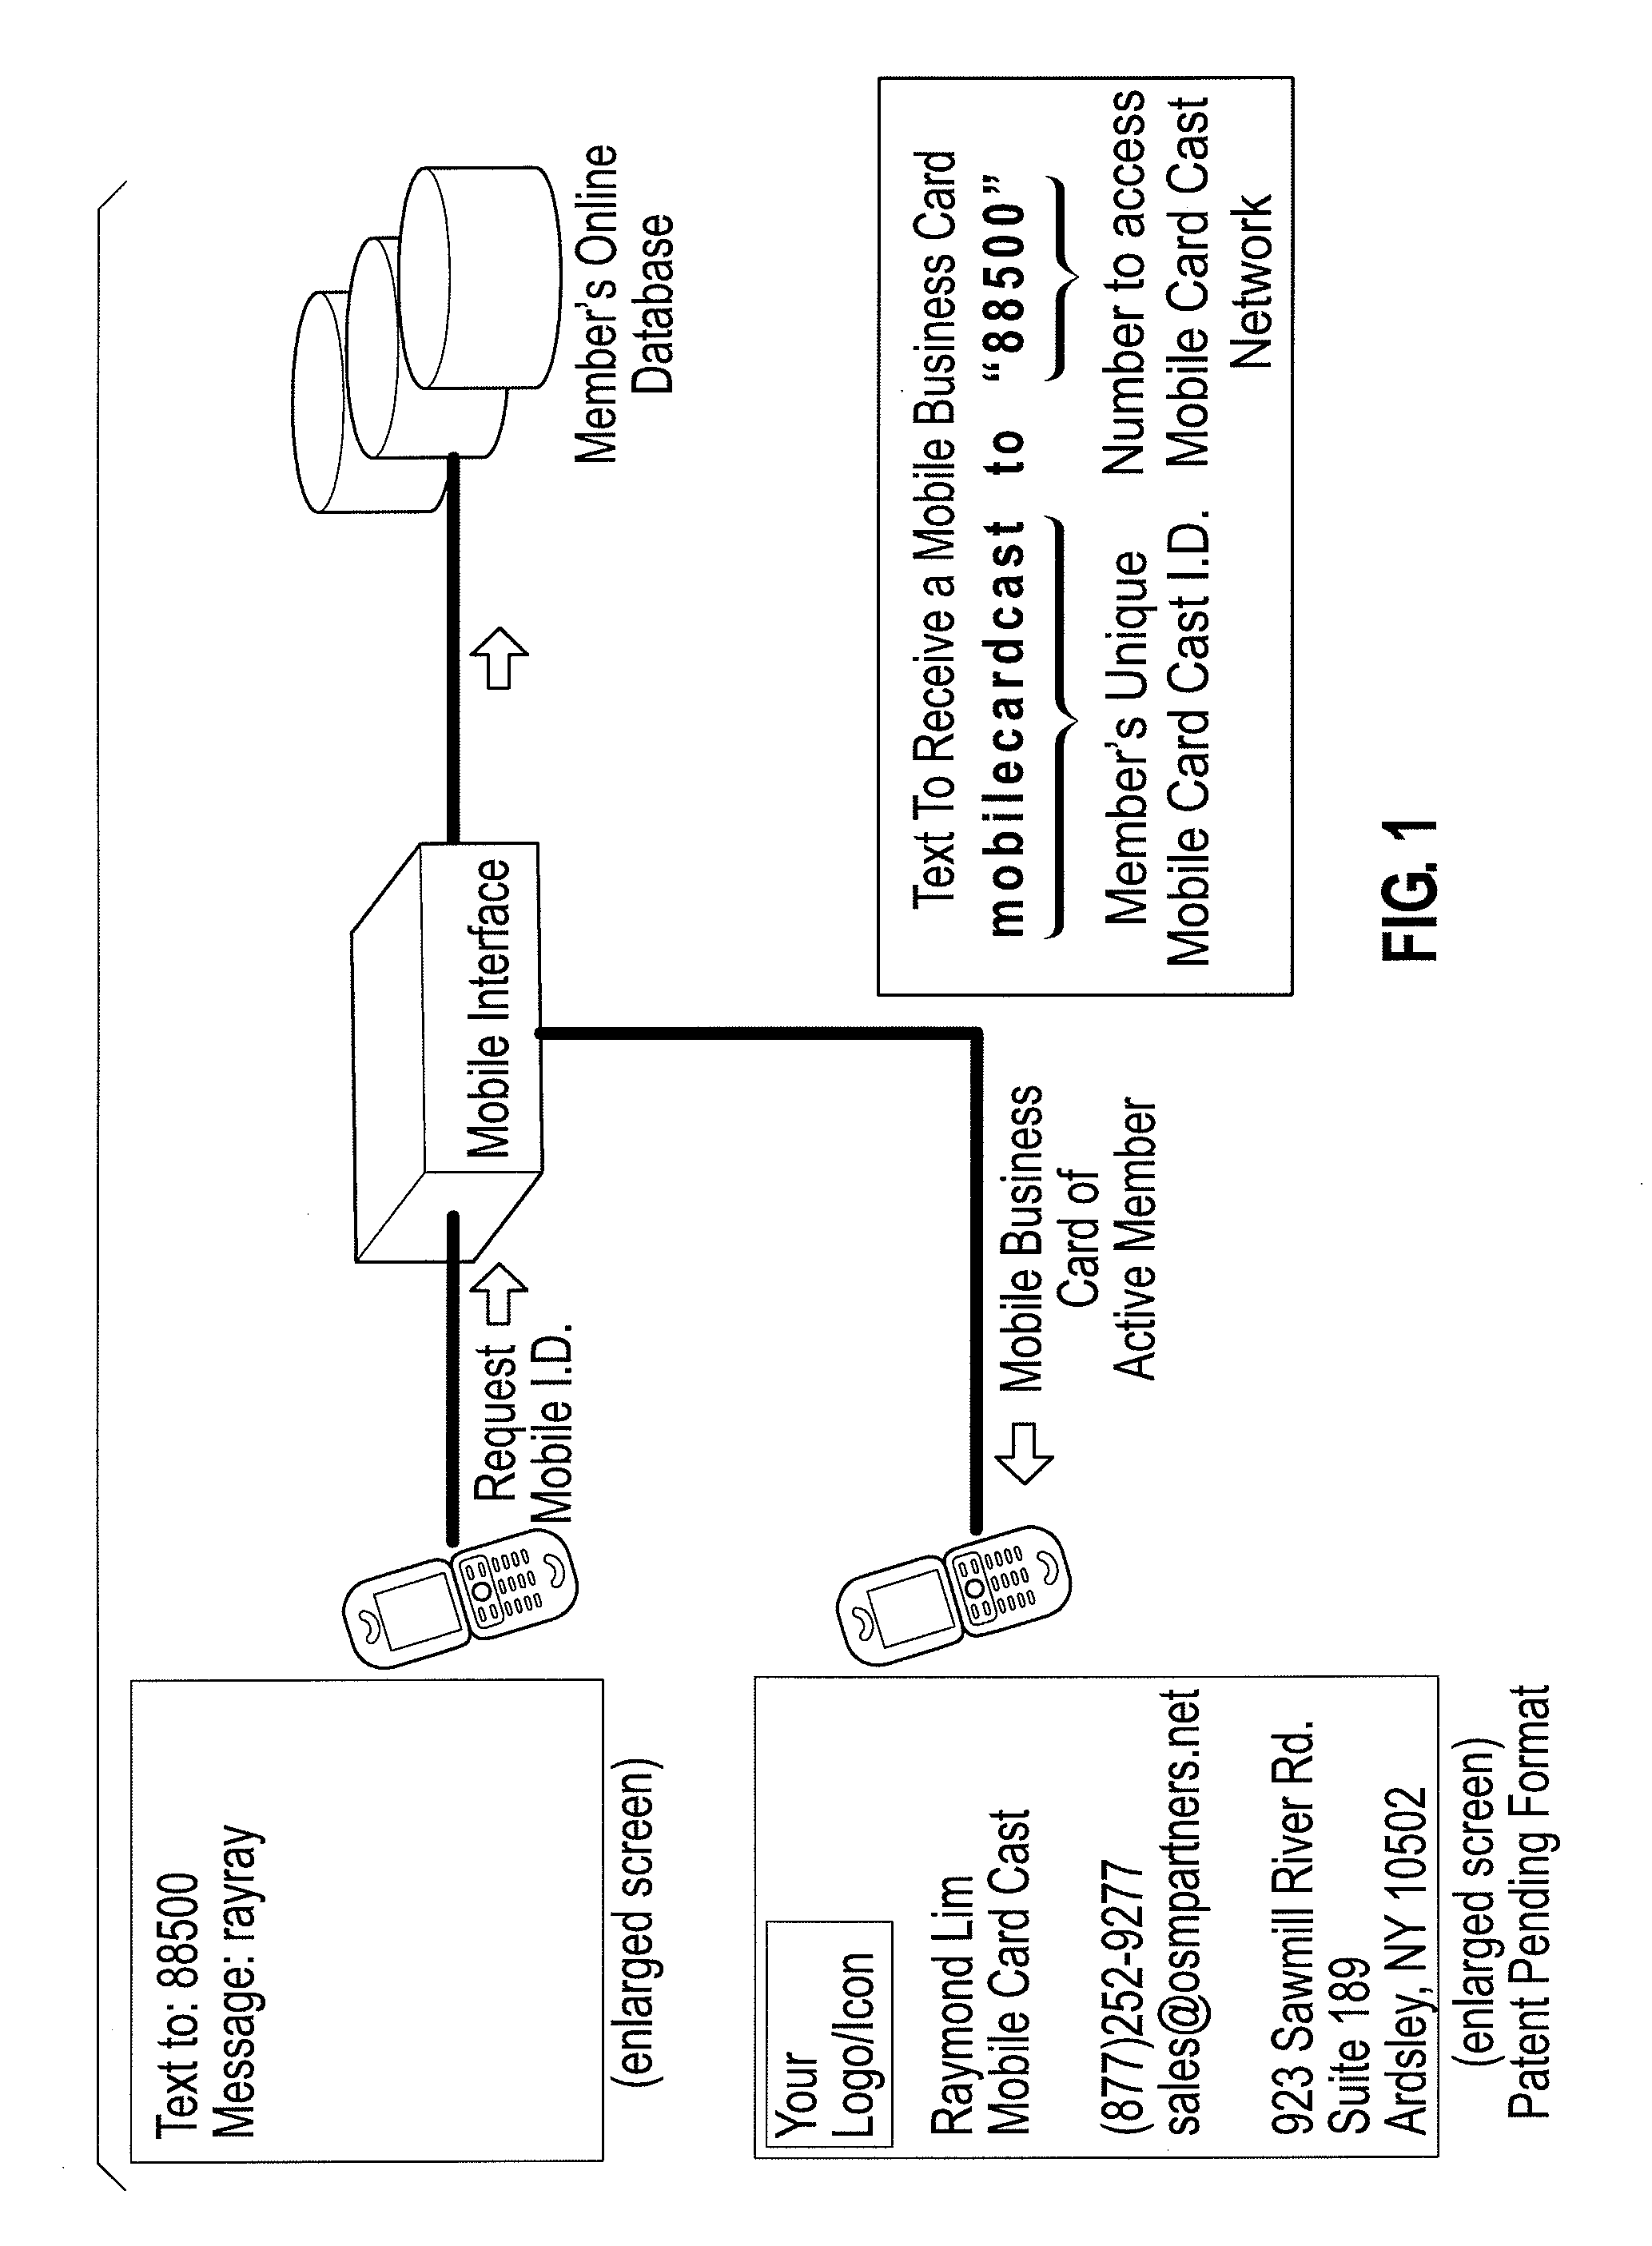 System and method for conveying personal information through cellular text messaging services